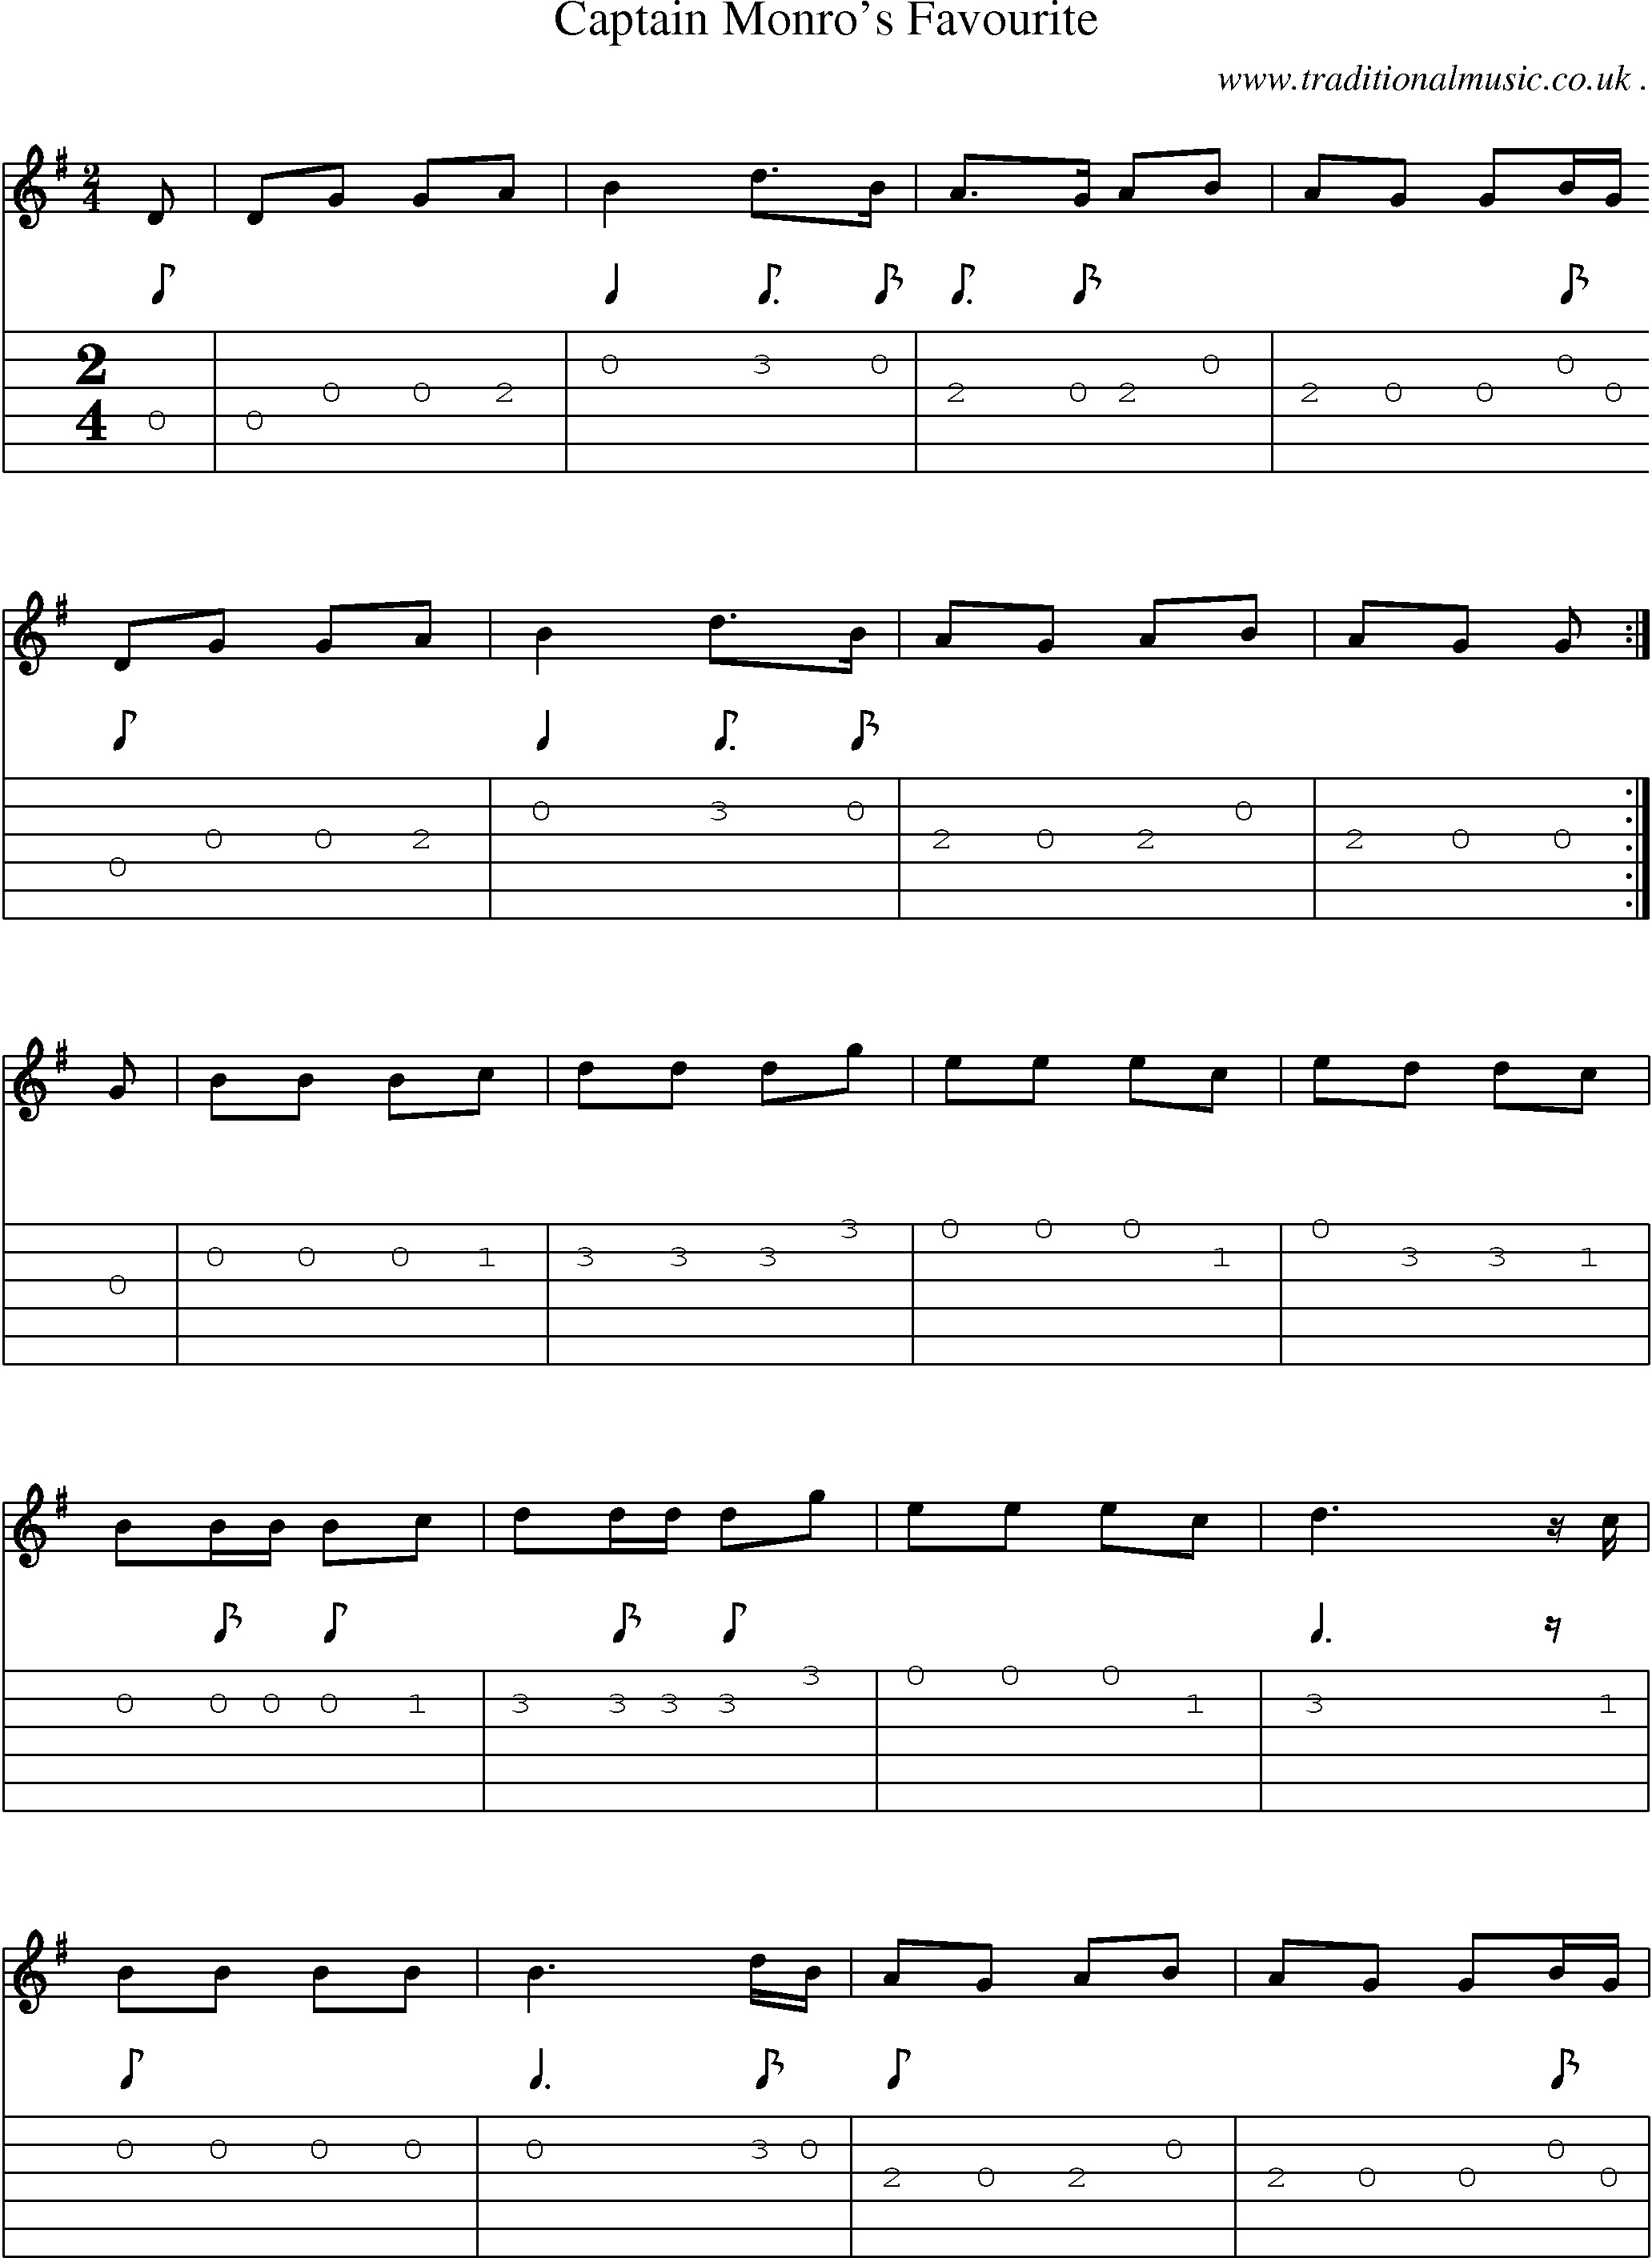 Sheet-music  score, Chords and Guitar Tabs for Captain Monros Favourite